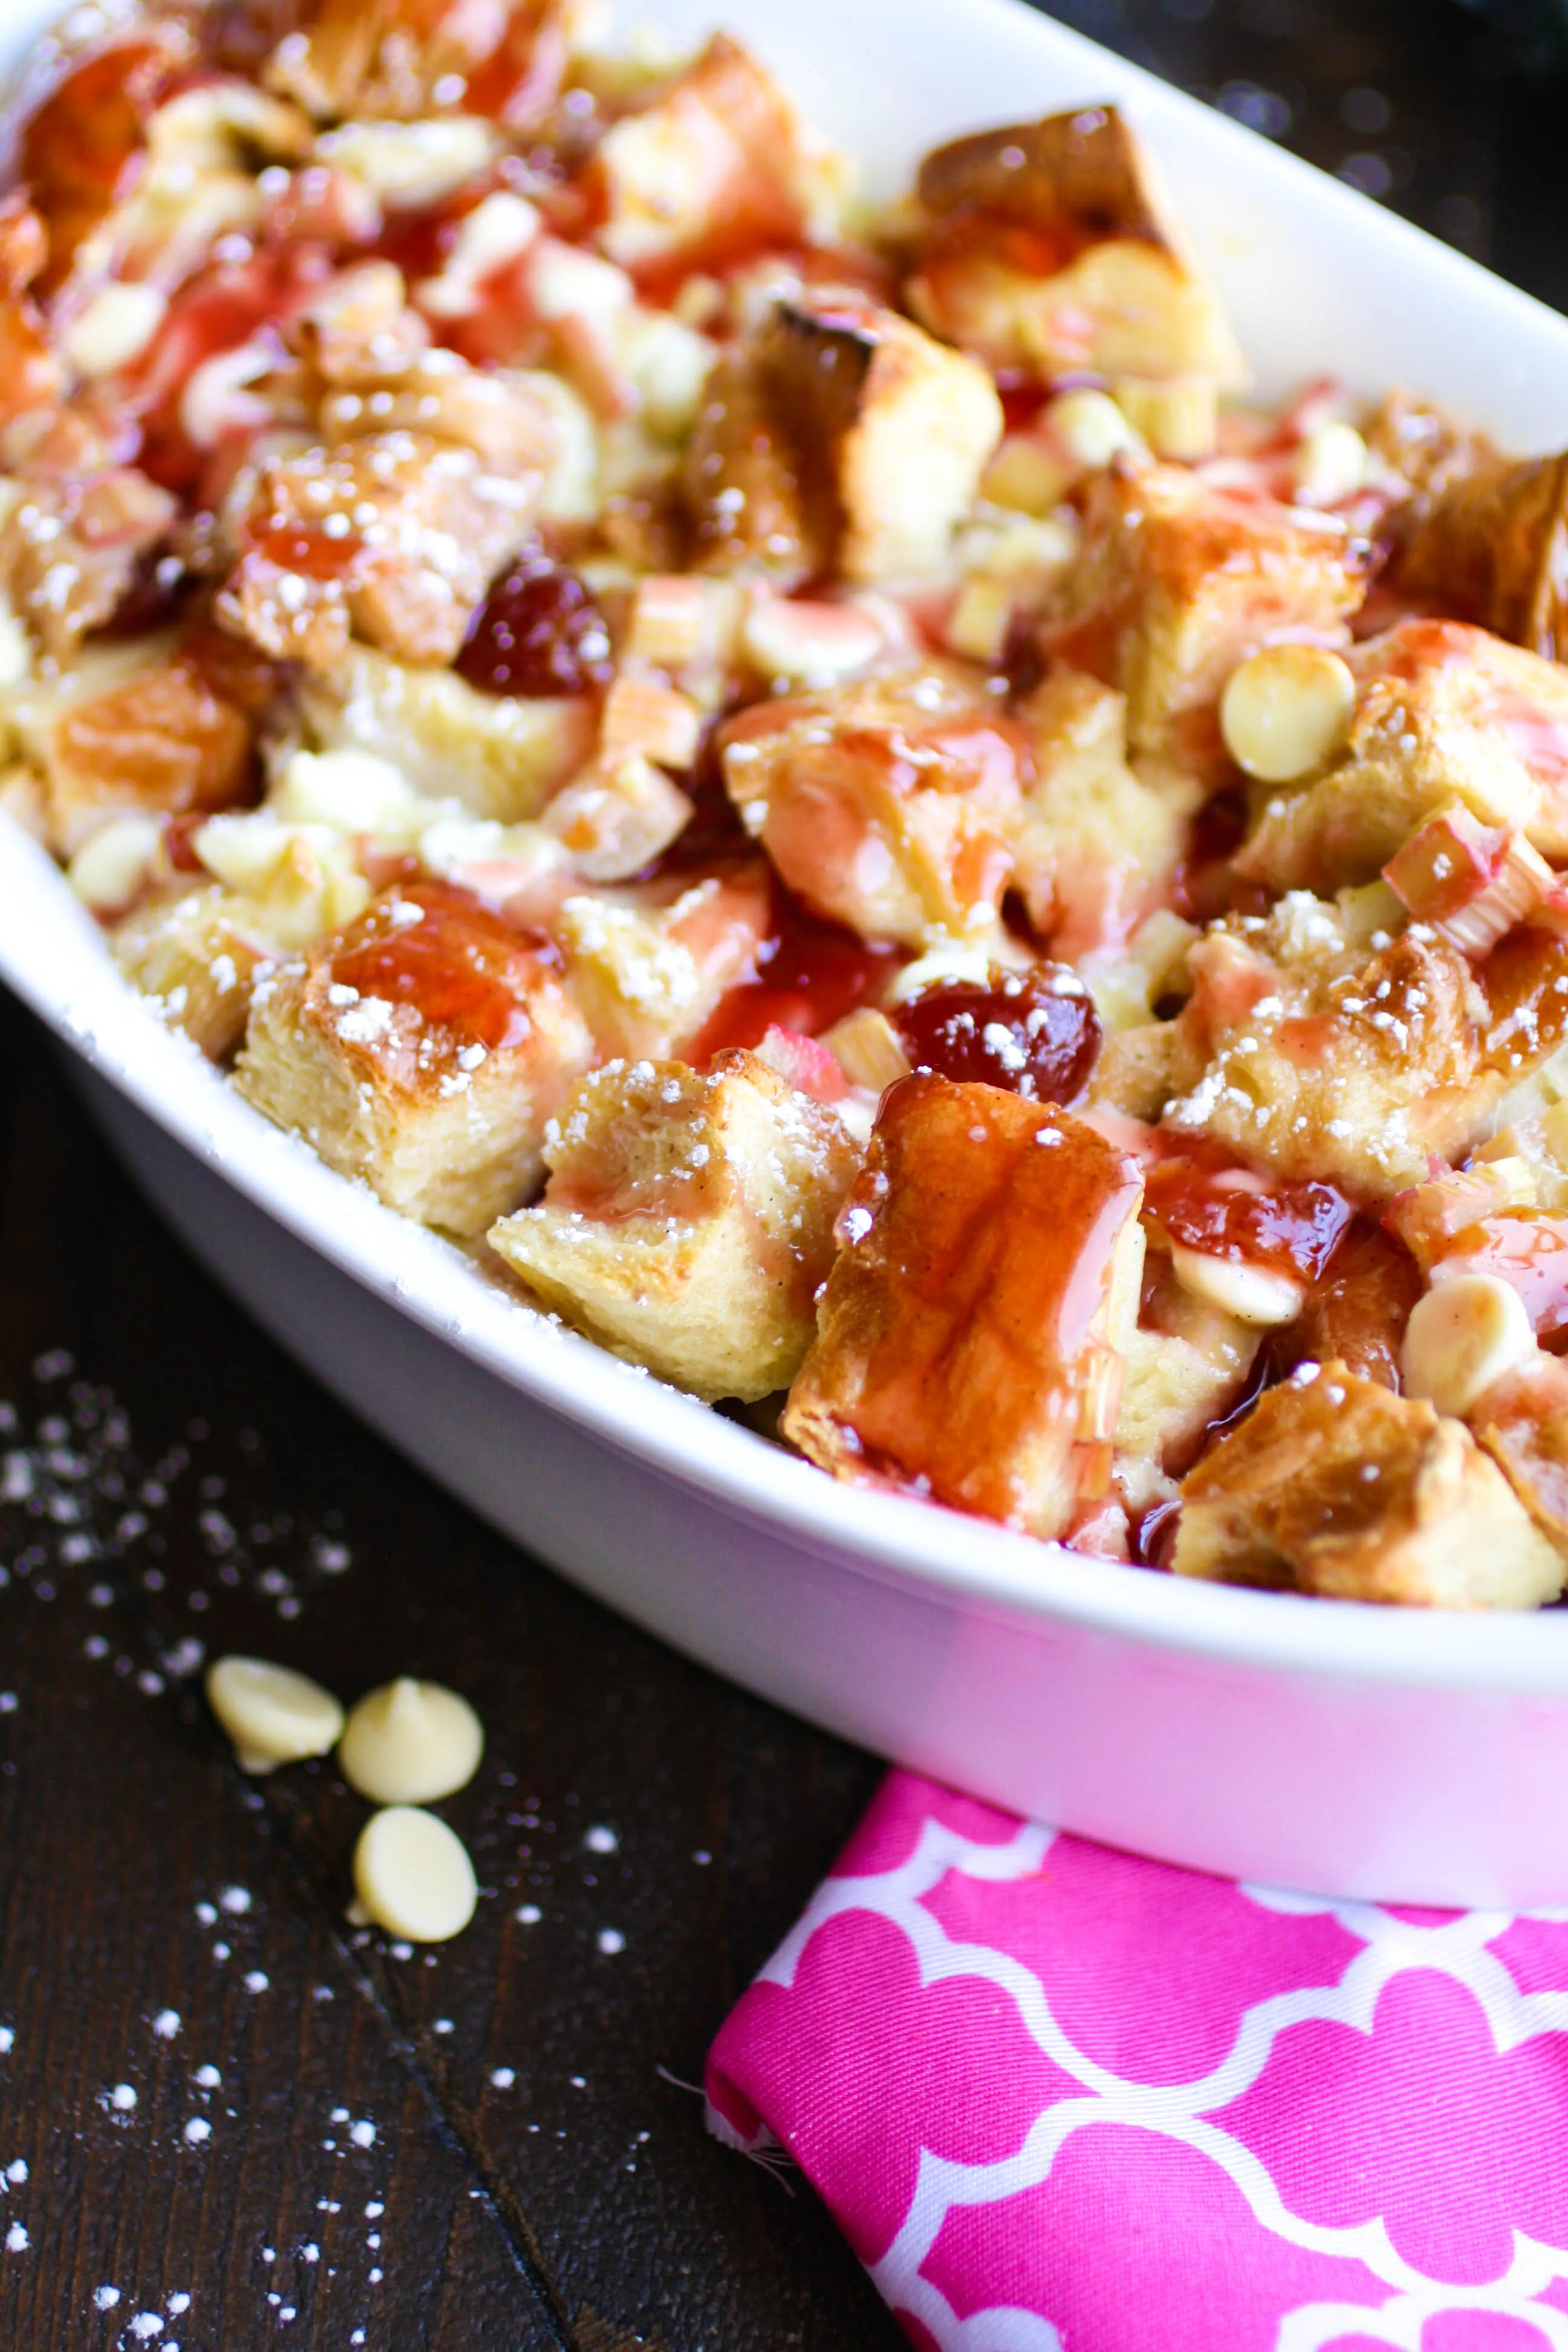 A bowl of Cherry-Rhubarb and White Chocolate Bread Pudding is a welcome end to any meal!